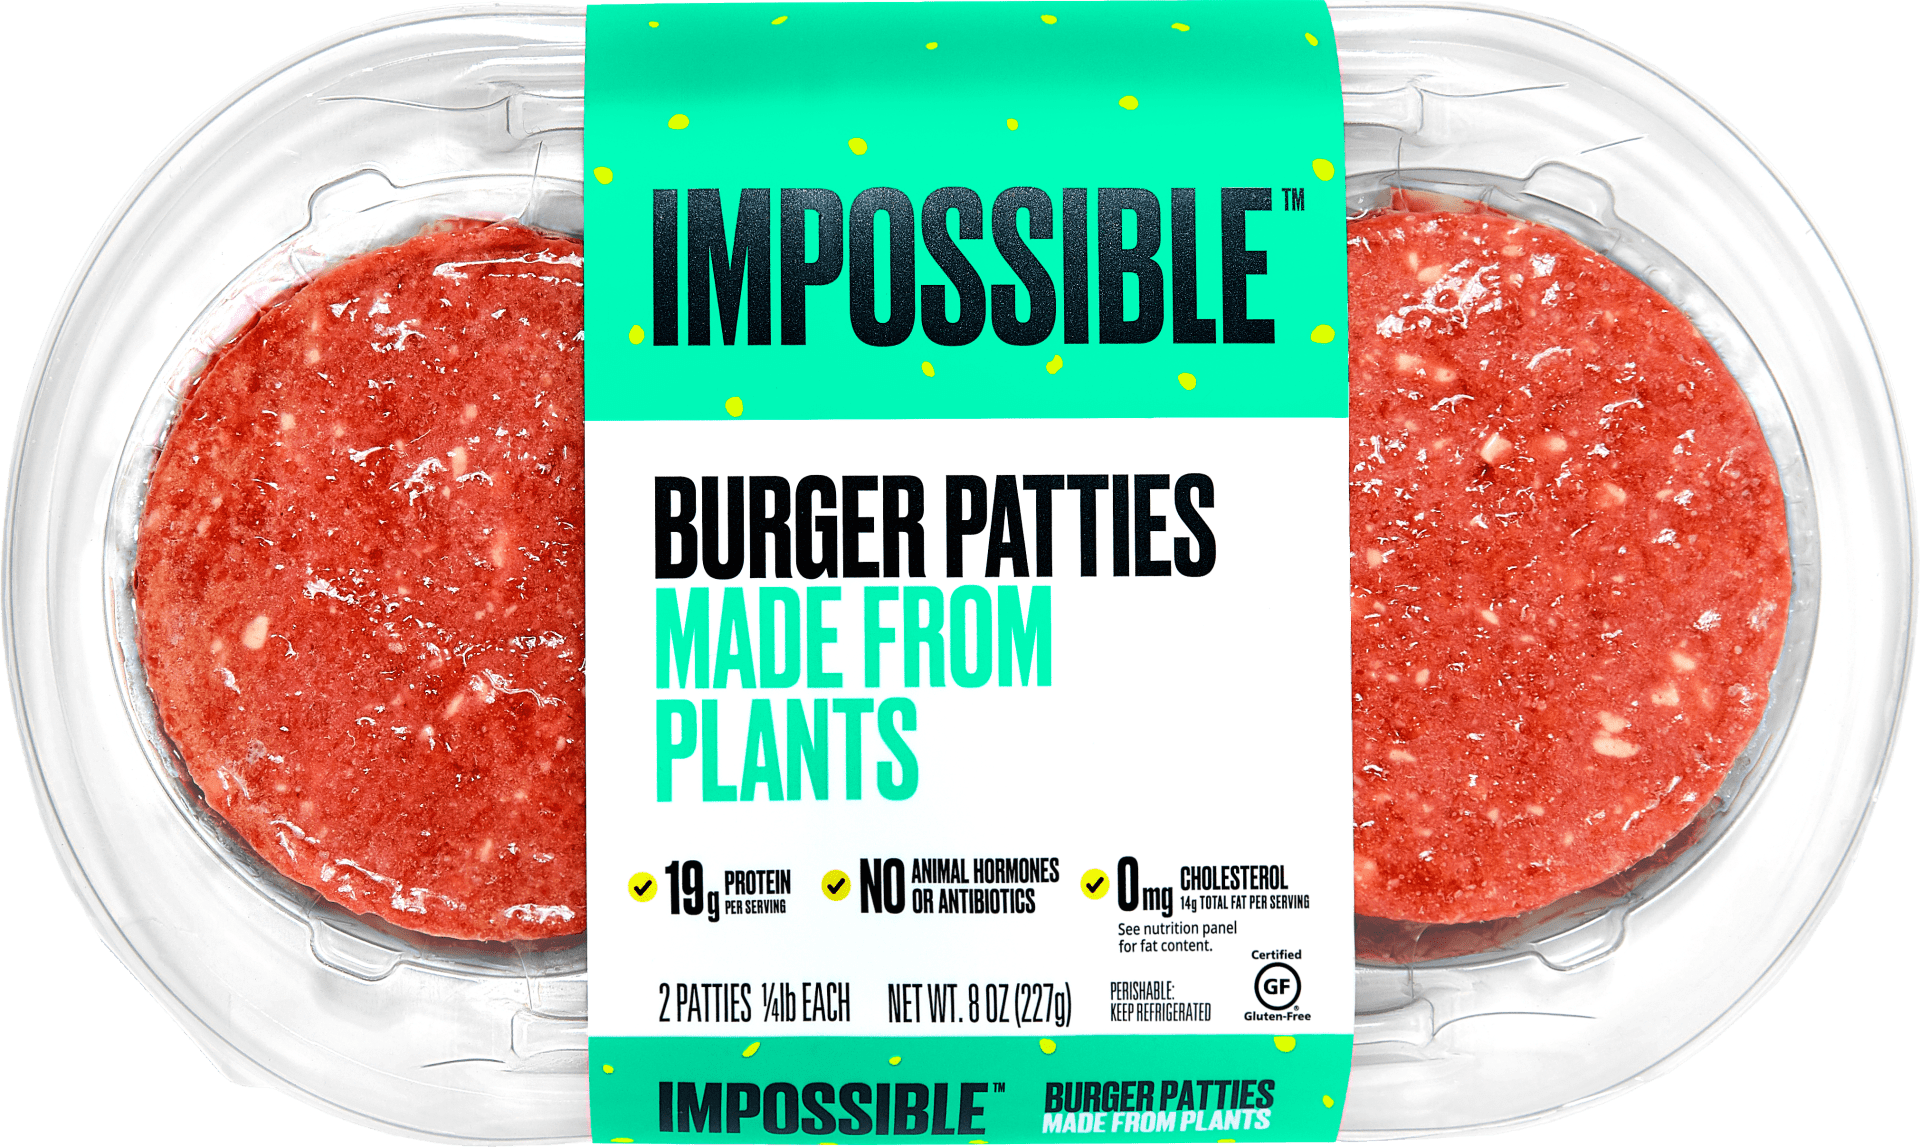 https://www.foodnavigator-usa.com/var/wrbm_gb_food_pharma/storage/images/publications/food-beverage-nutrition/foodnavigator-usa.com/article/2022/03/07/kroger-teams-up-with-impossible-foods-via-home-chef-brand-we-view-this-test-as-a-threat-to-beyond-meat-says-analyst/13300966-1-eng-GB/Kroger-teams-up-with-Impossible-Foods-via-Home-Chef-brand-We-view-this-test-as-a-threat-to-Beyond-Meat-says-analyst.png